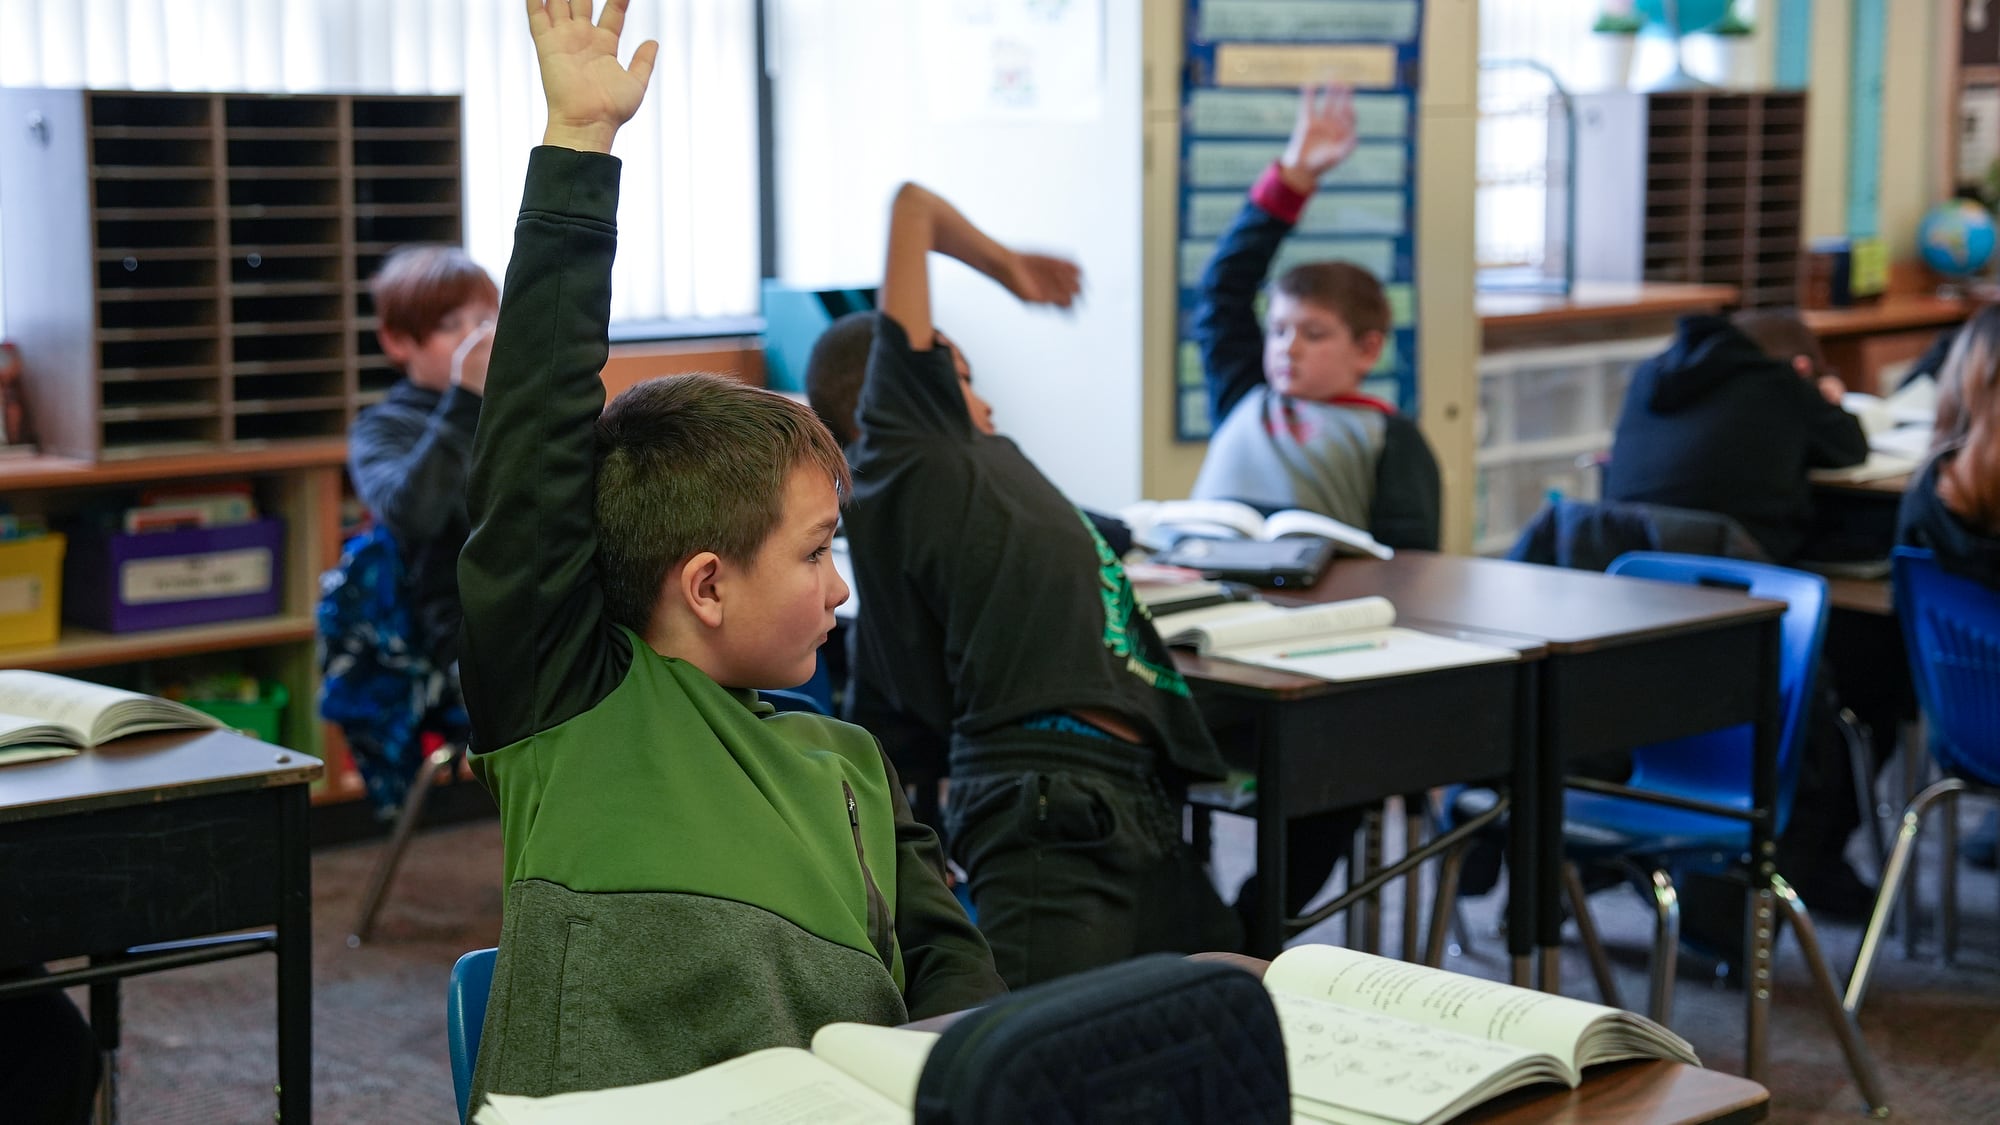 A group of young students sitting at their desks raise their hands in a classroom.